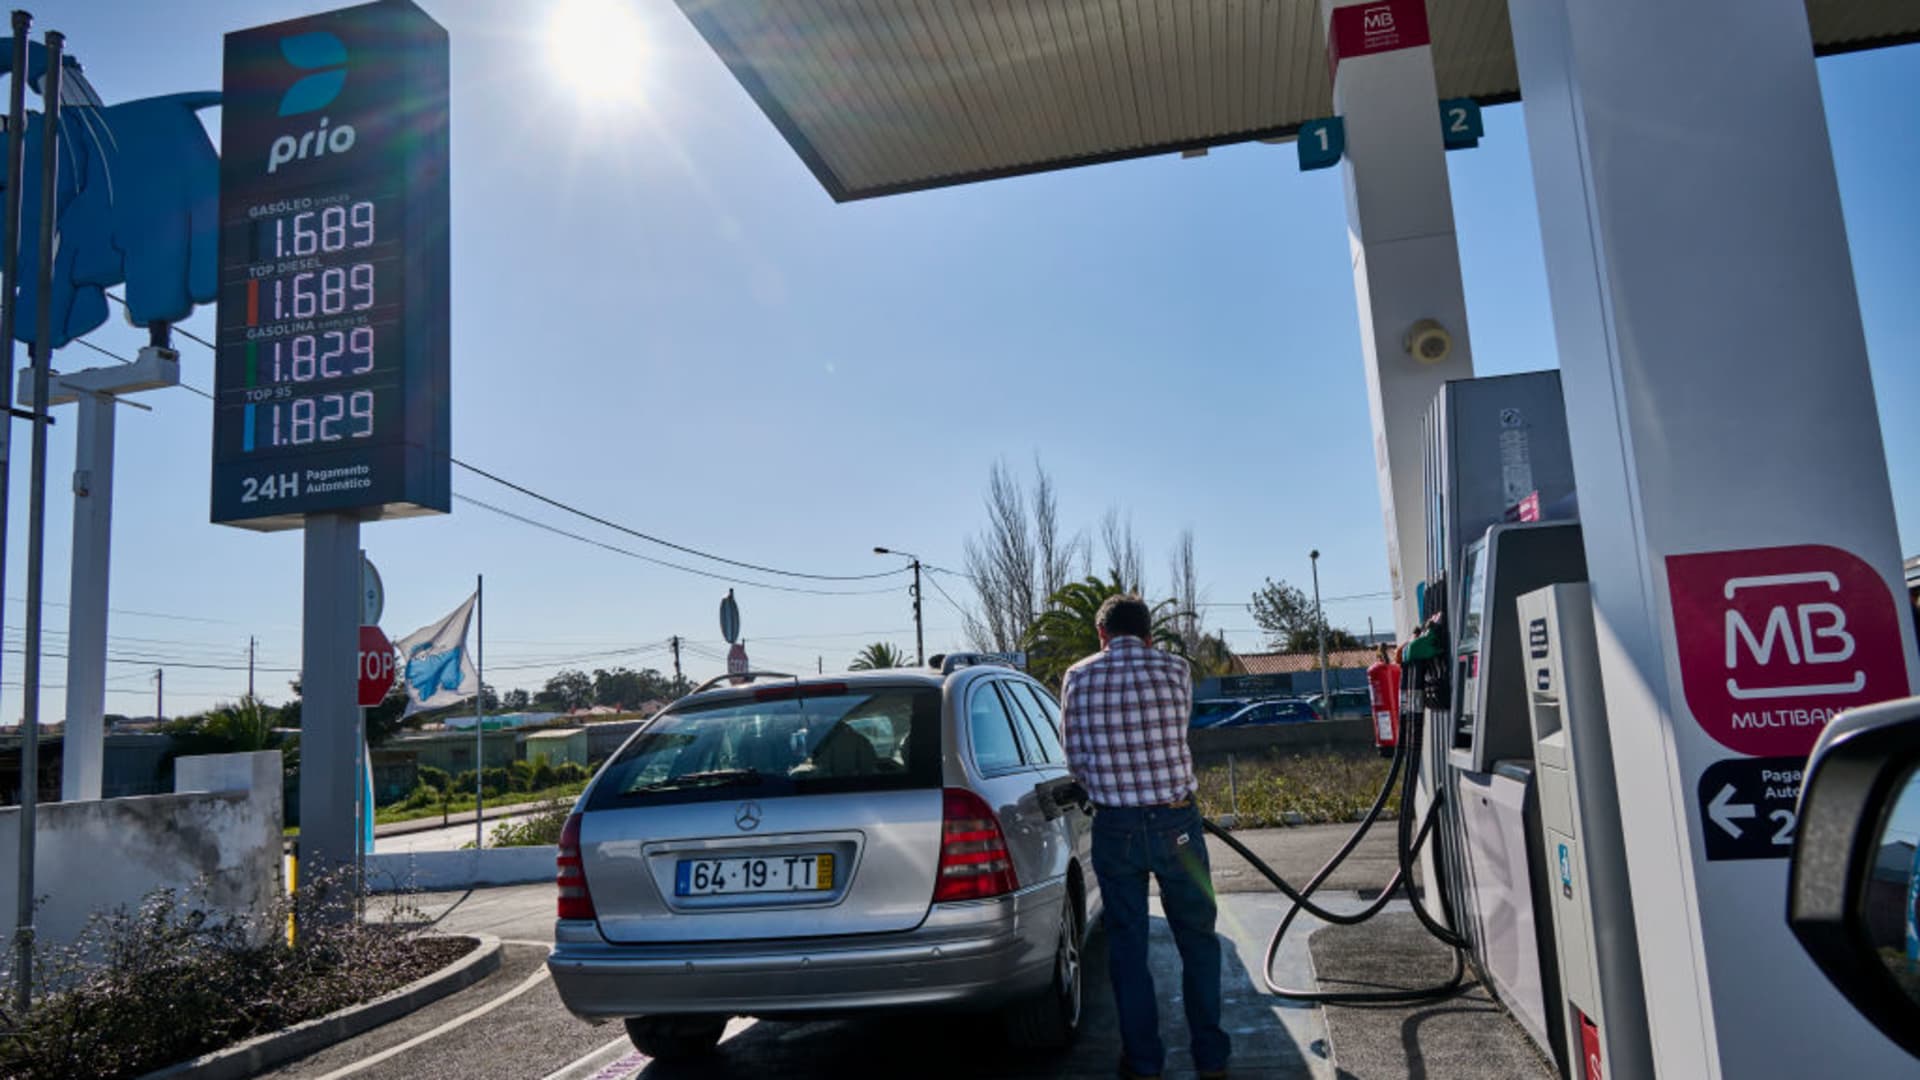 A driver fills up the tank of his car at the pump of a low-cost Prio Gas Station on the eve of an announced fuel price increase on March 06, 2022, in Portugal.